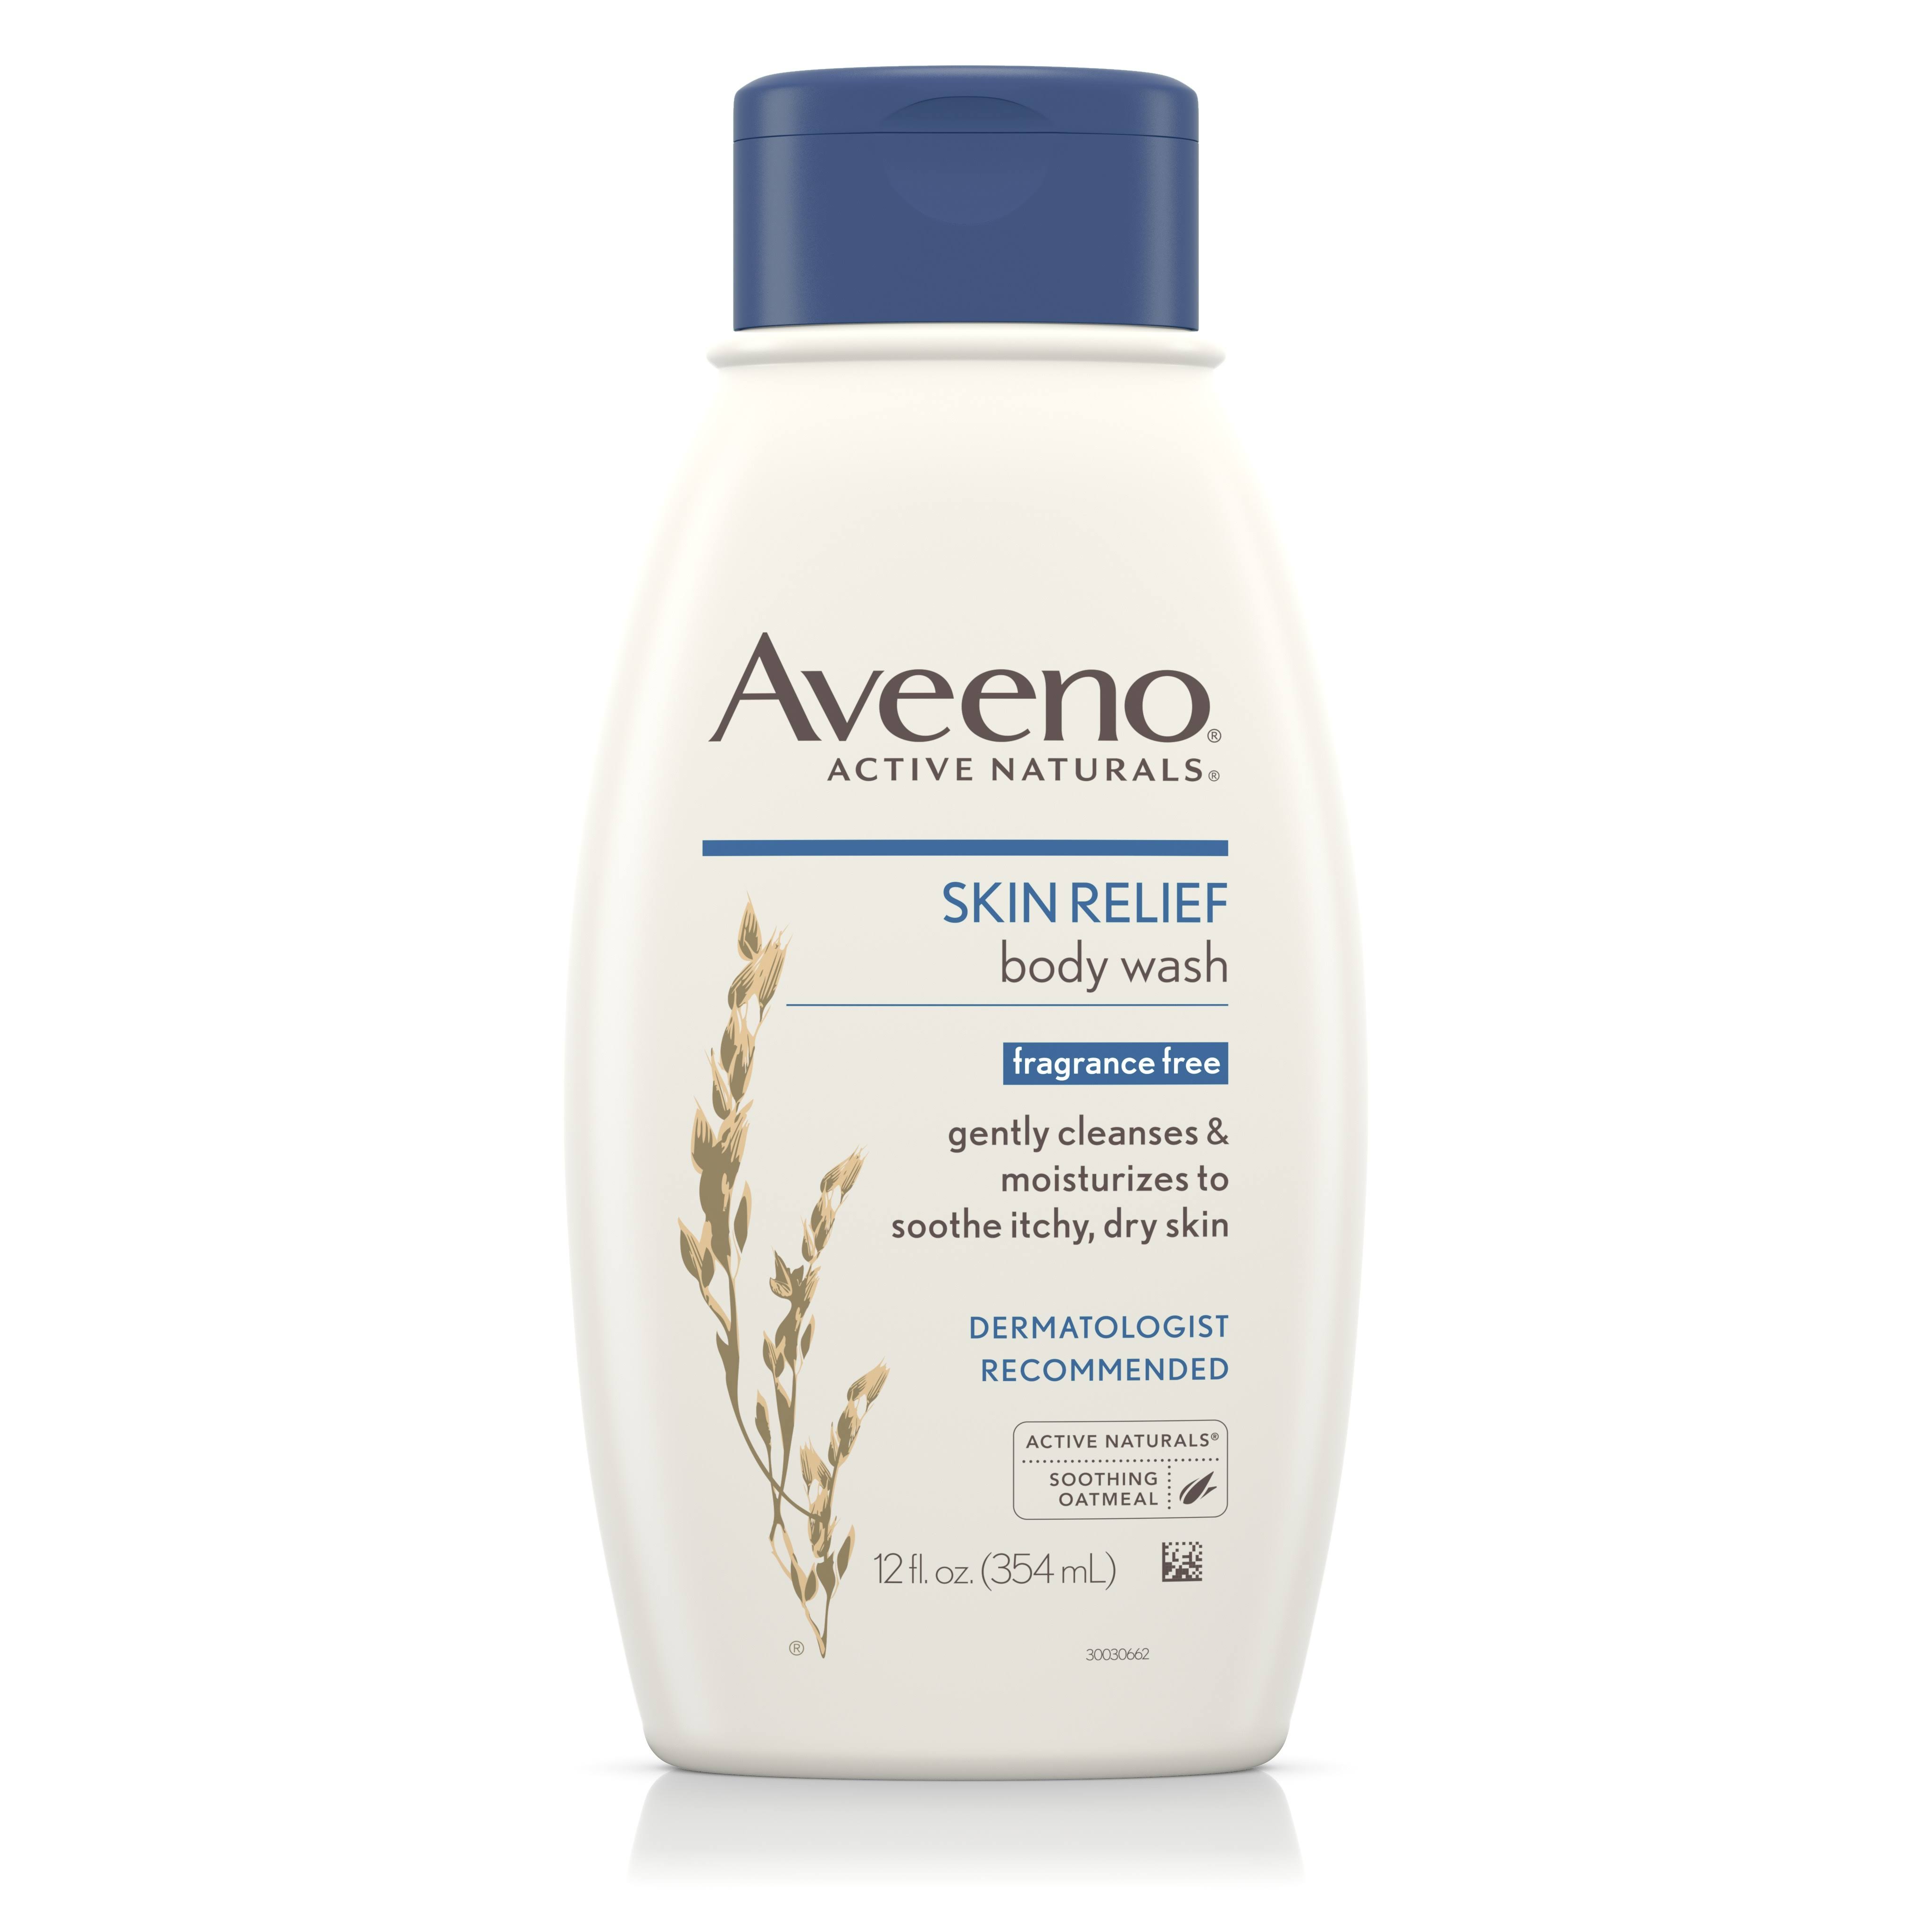 Aveeno Active Naturals Skin Relief Body Wash - Fragrance Free, 350ml